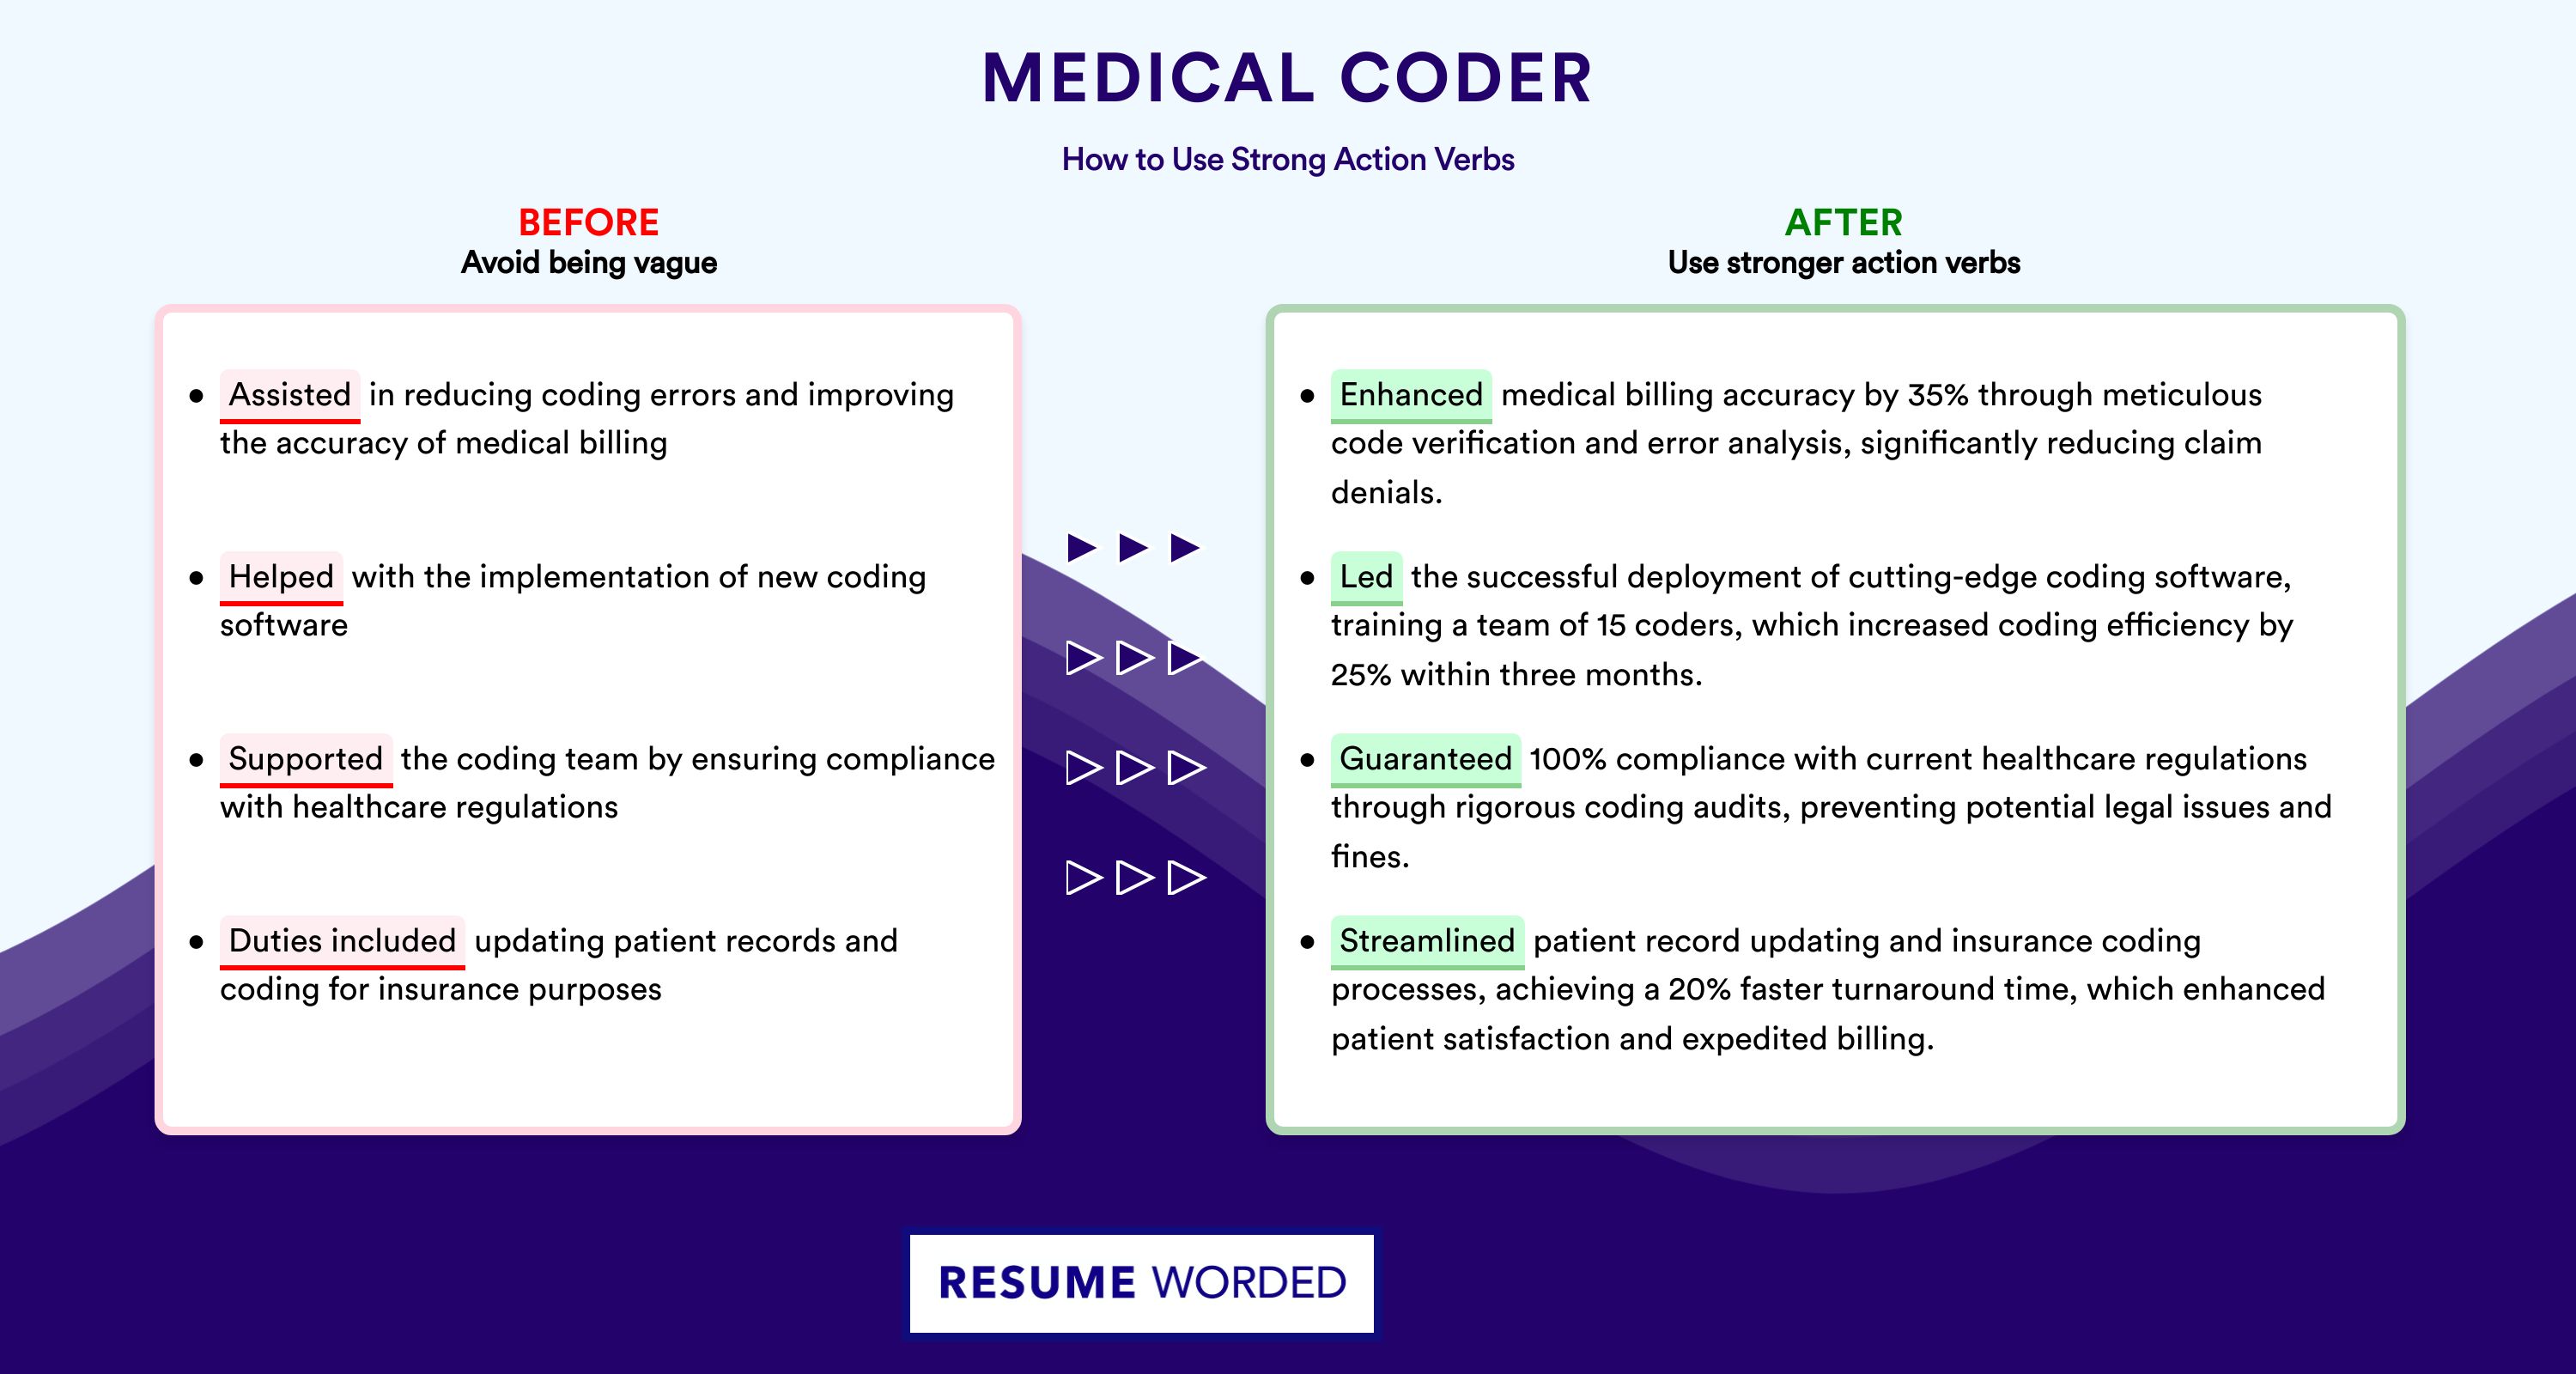 Action Verbs for Medical Coder